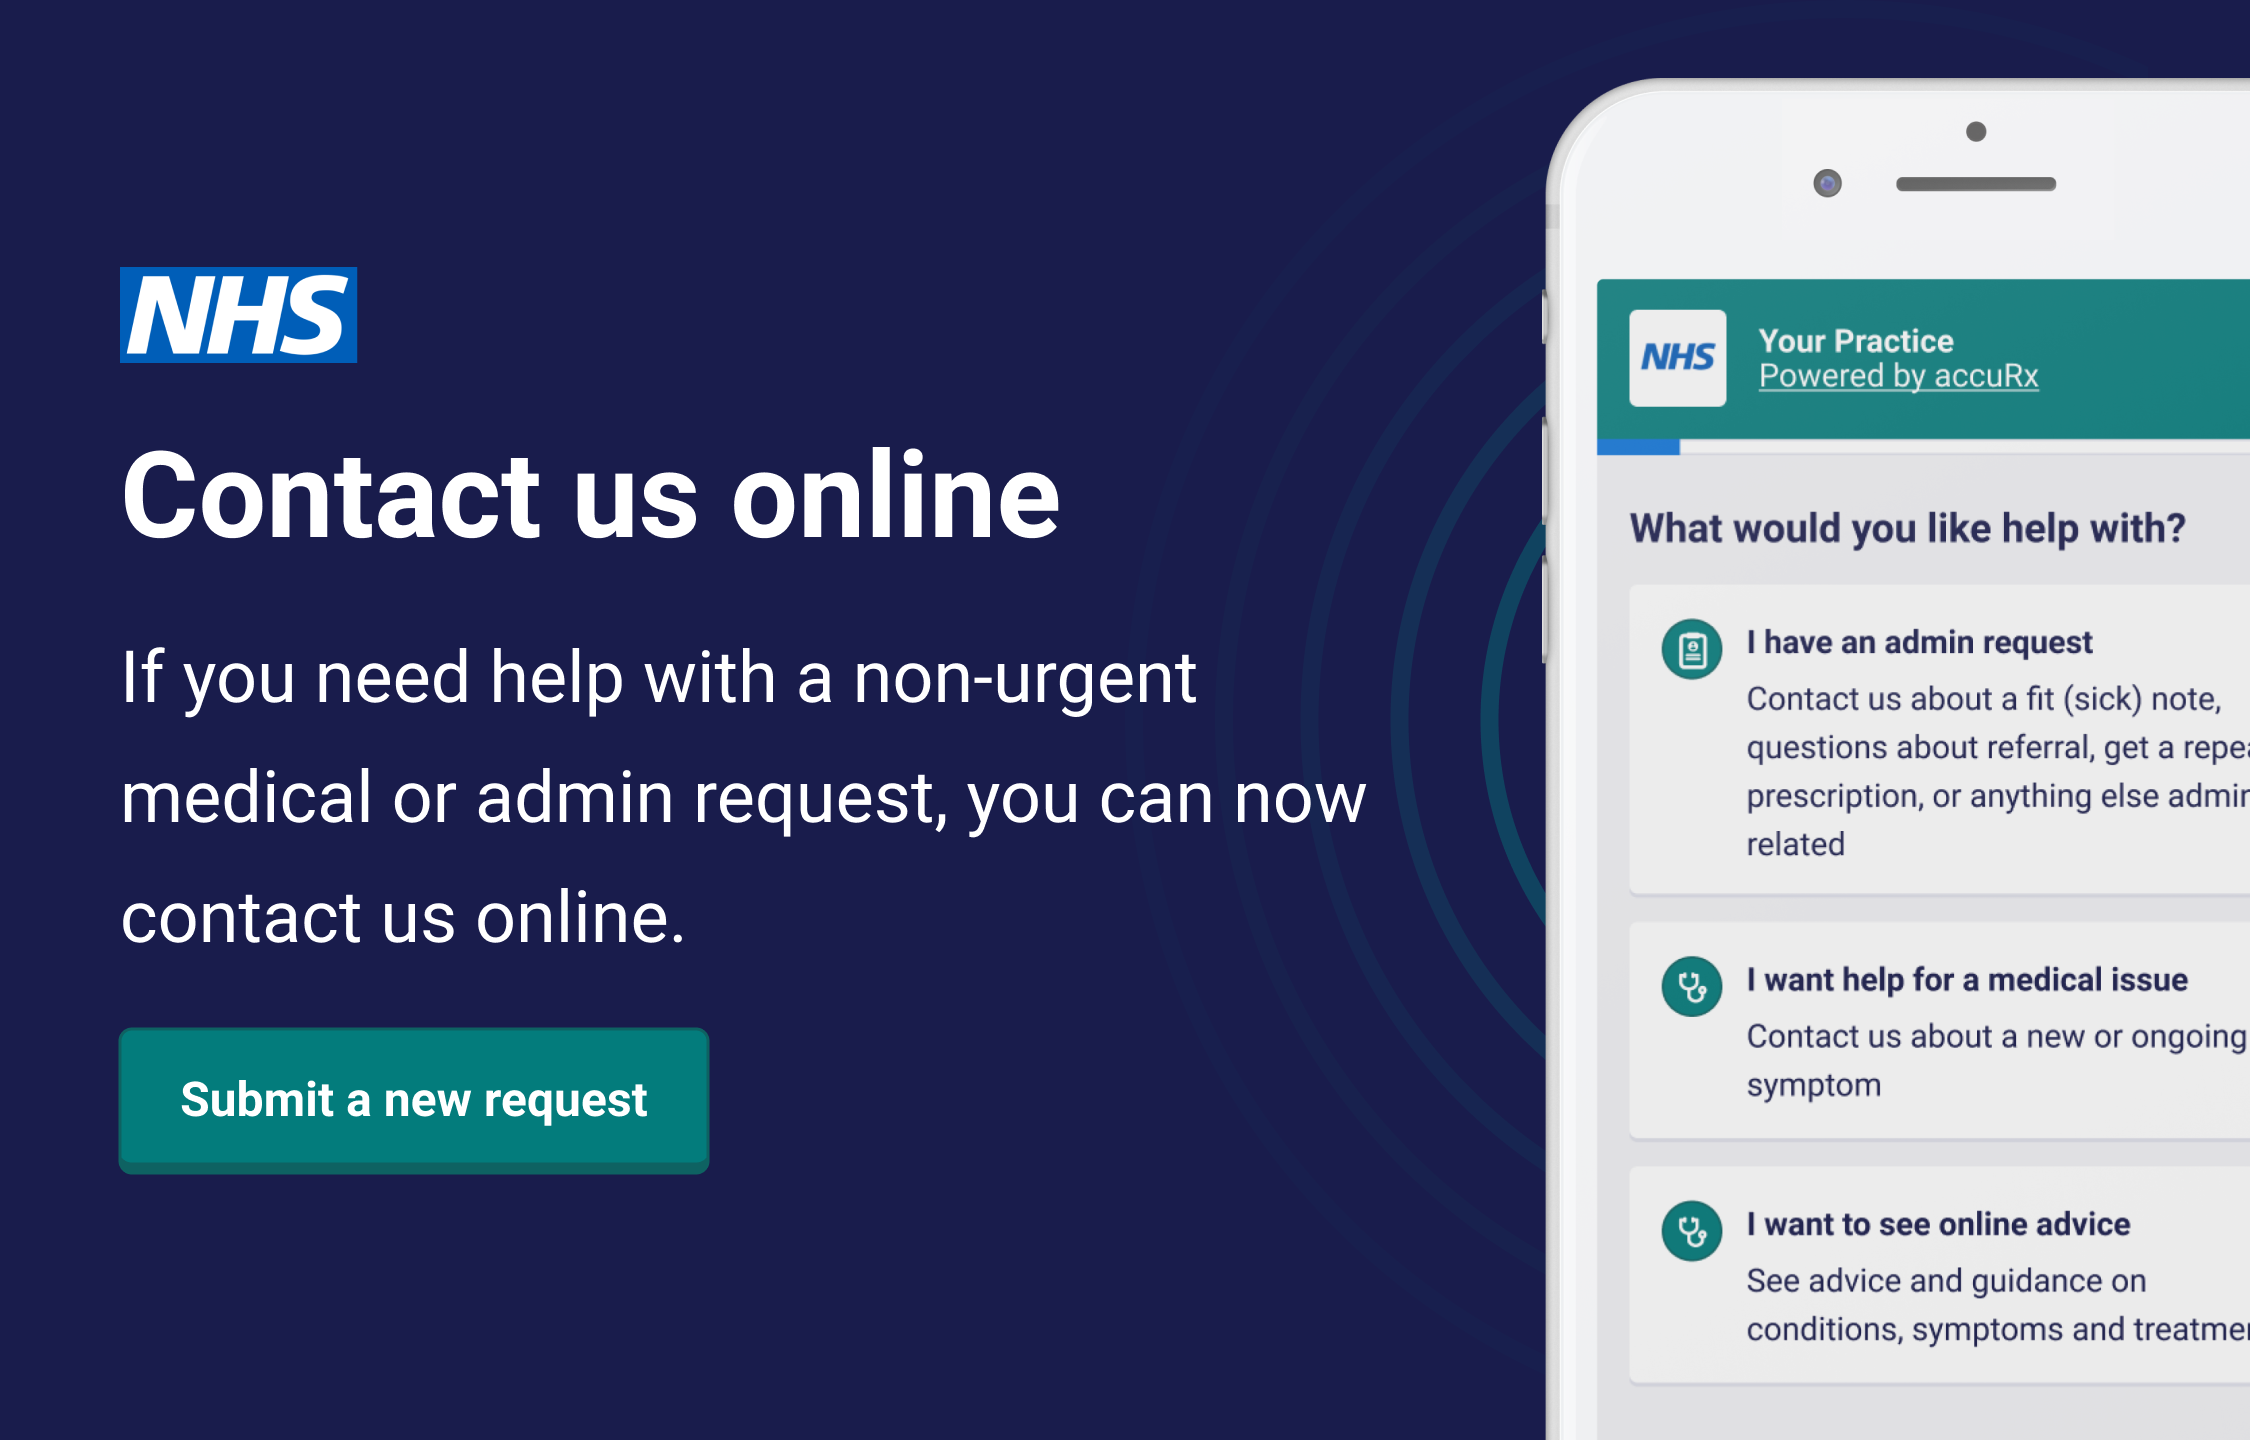 Contact us online if you need help with a non-urgent medical or admin request, you can now contact us onlne submit a new request